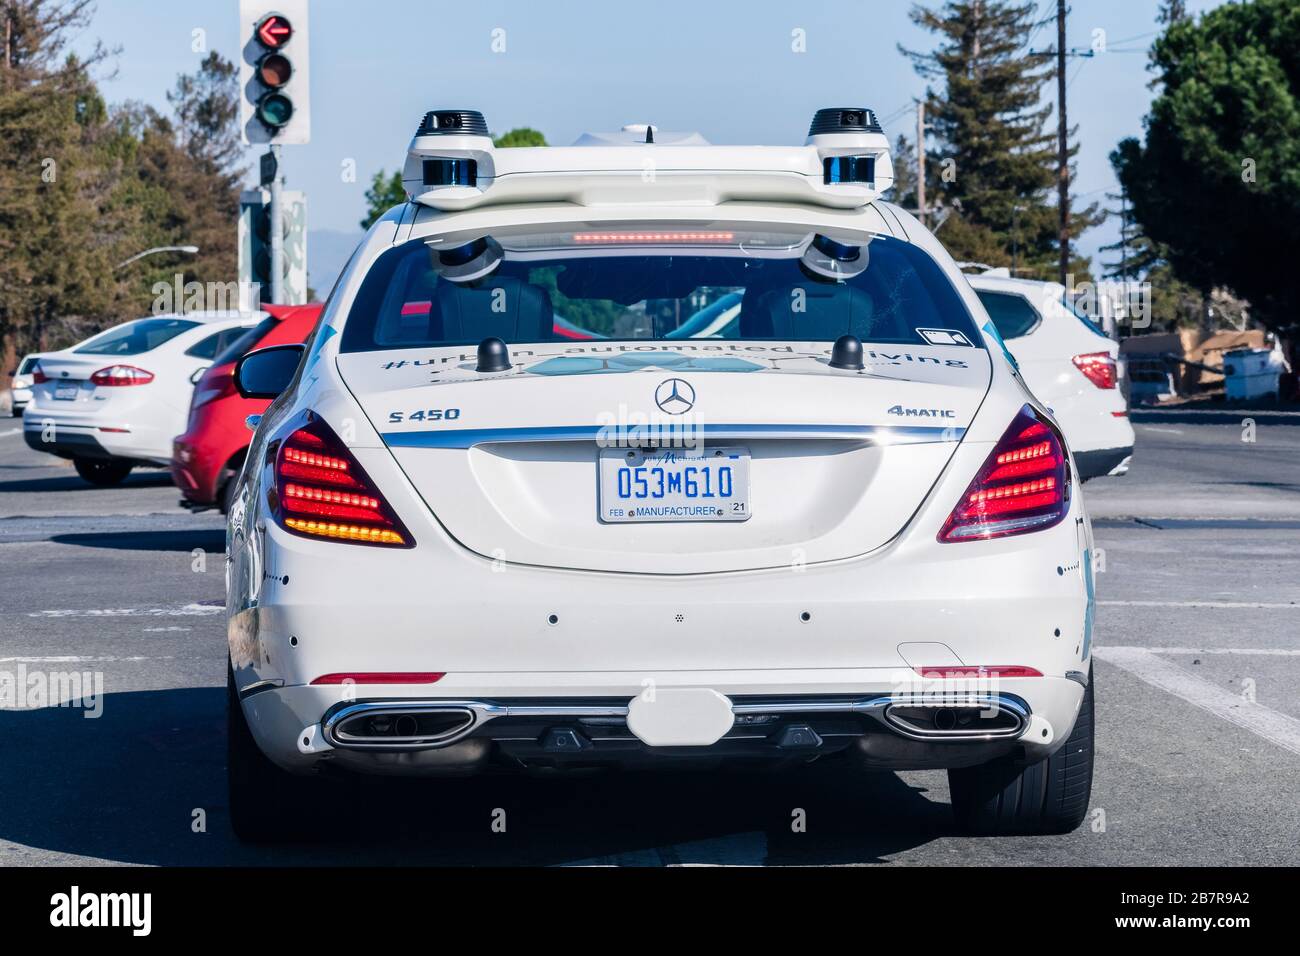 March 4, 2020 Santa Clara / CA / USA - Mercedes Benz self driving vehicle  performing tests on the streets of Silicon Valley; Daimler and Bosch partne  Stock Photo - Alamy